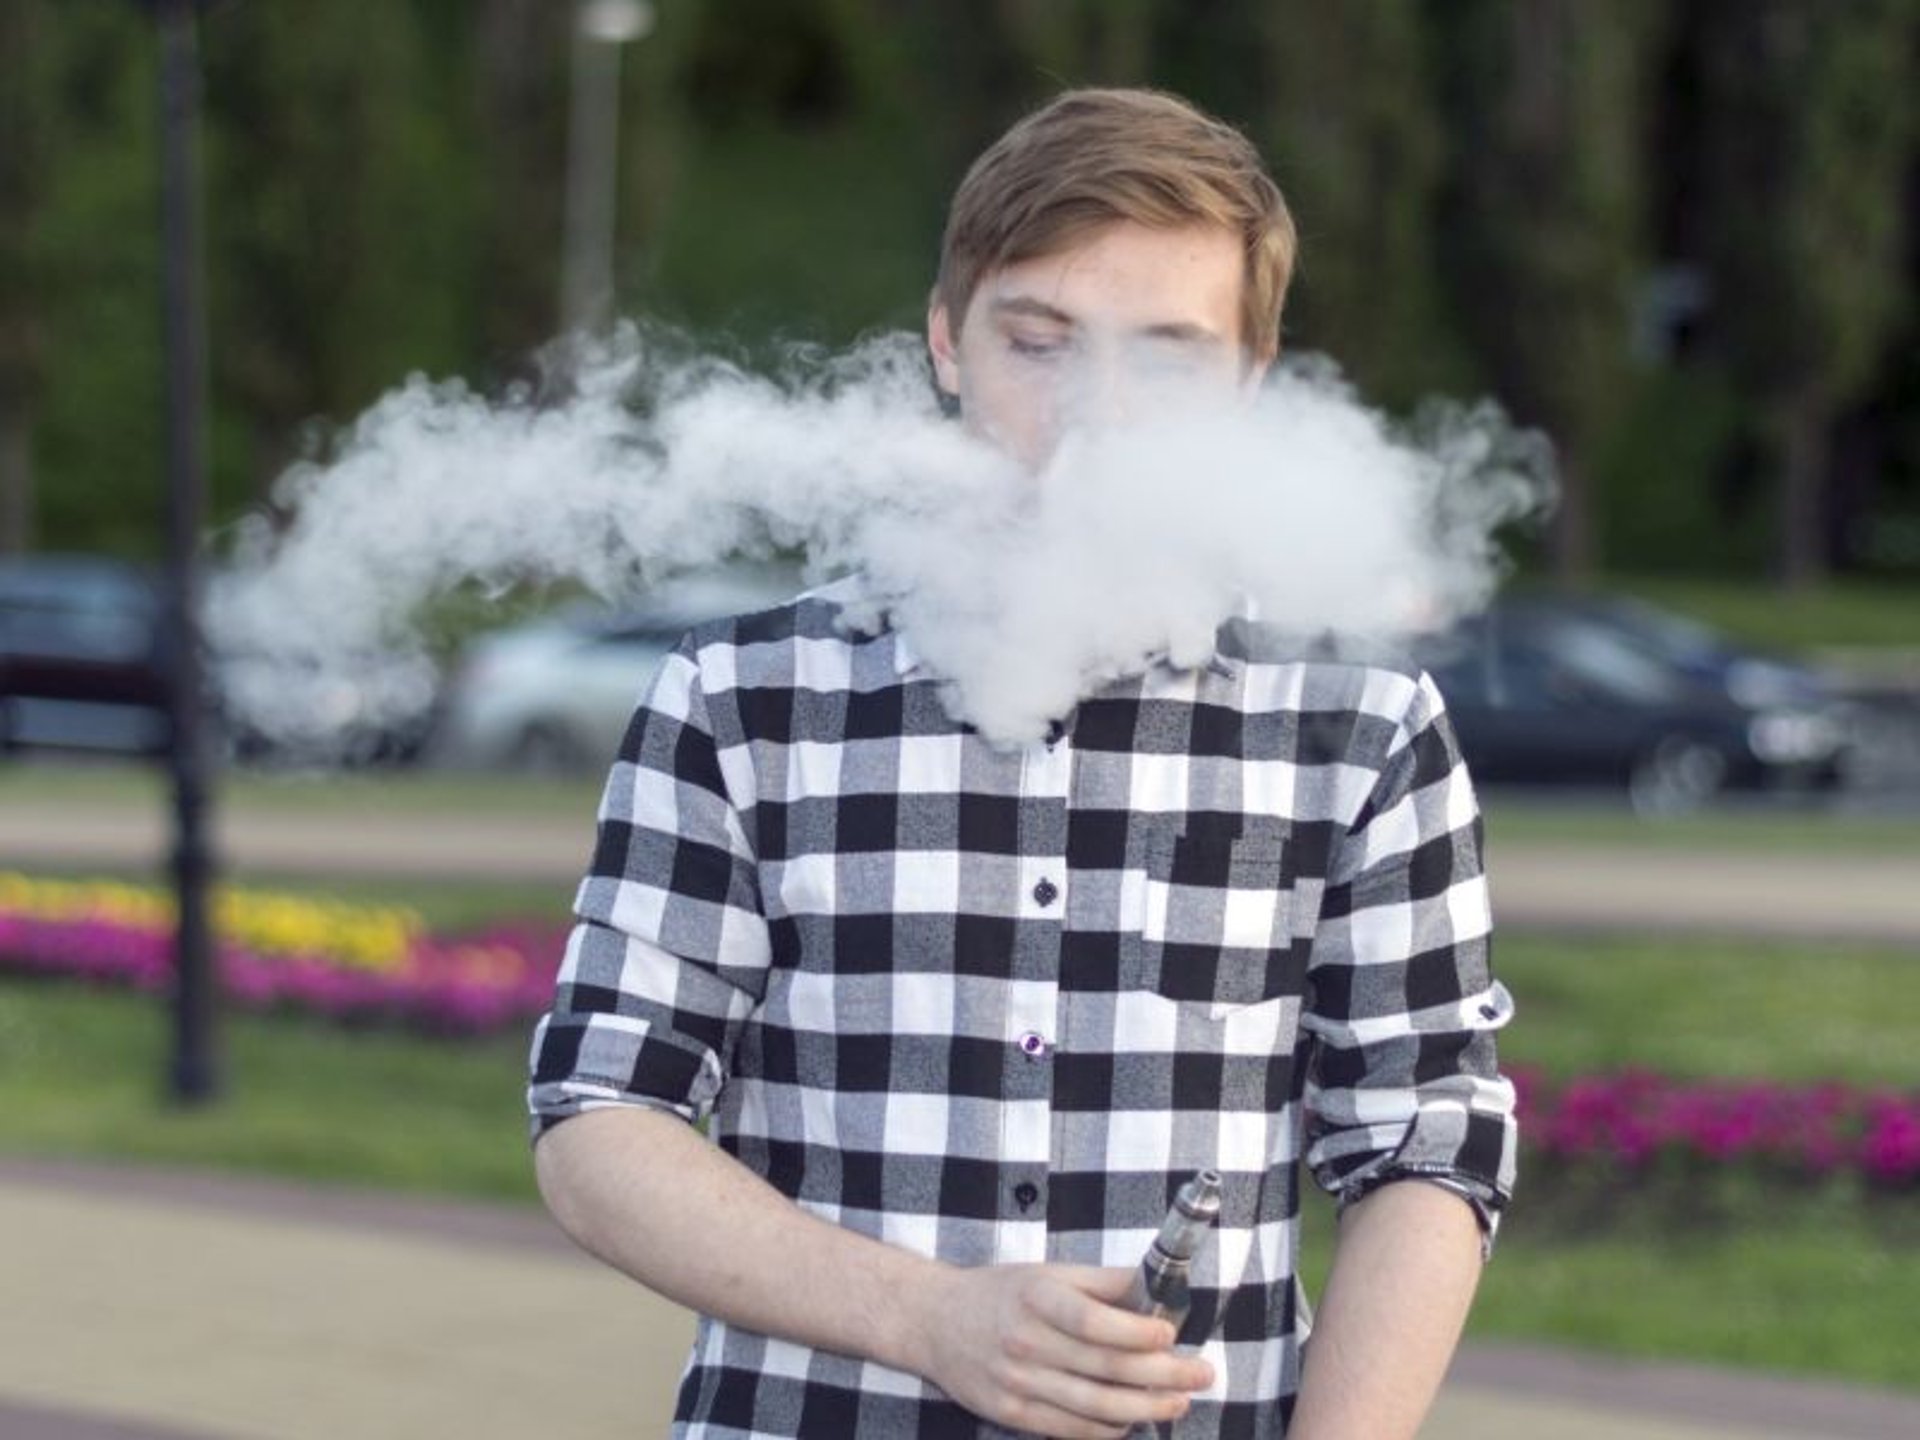 Youth Vaping Rates Have Plunged During Lockdown: Study thumbnail